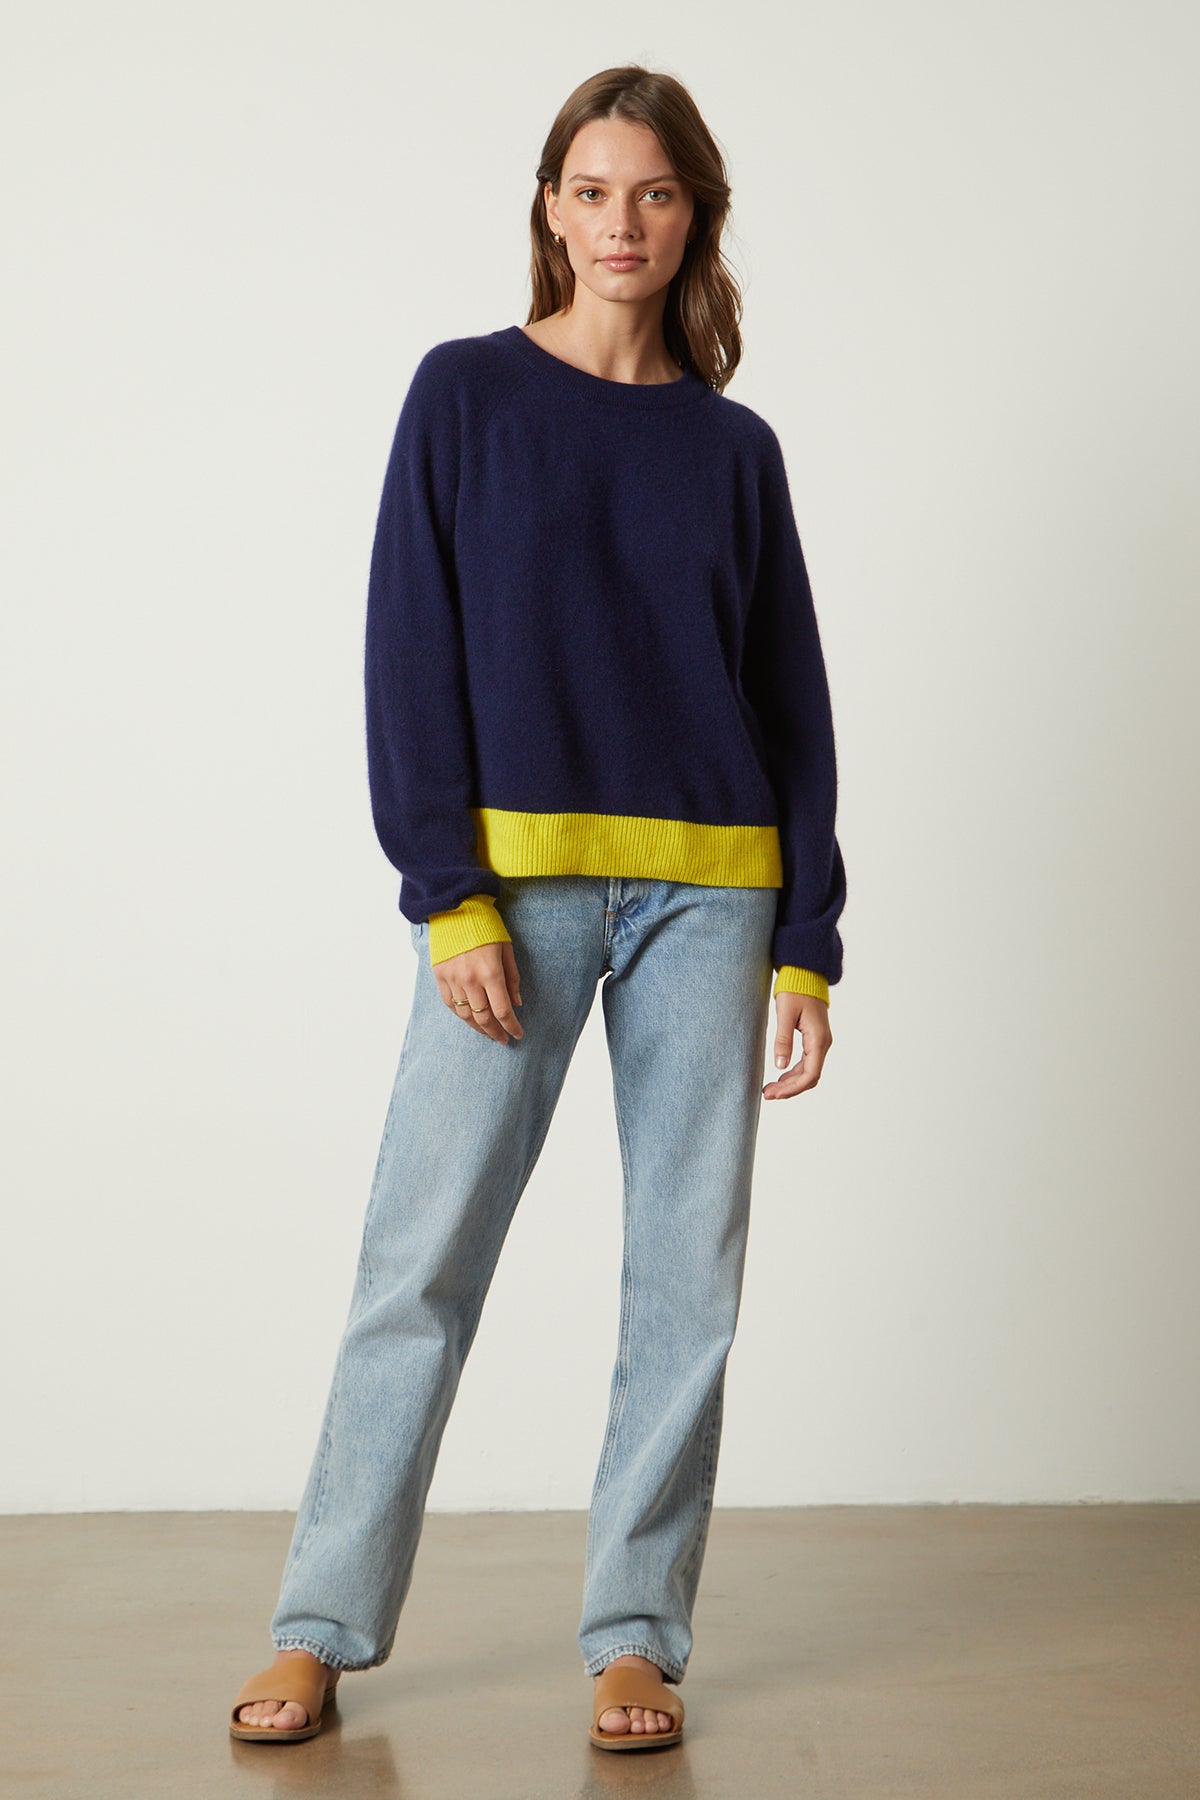 Claire Sweater in navy with yellow contrast at the cuffs and hemline with blue denim full length front-26022681903297